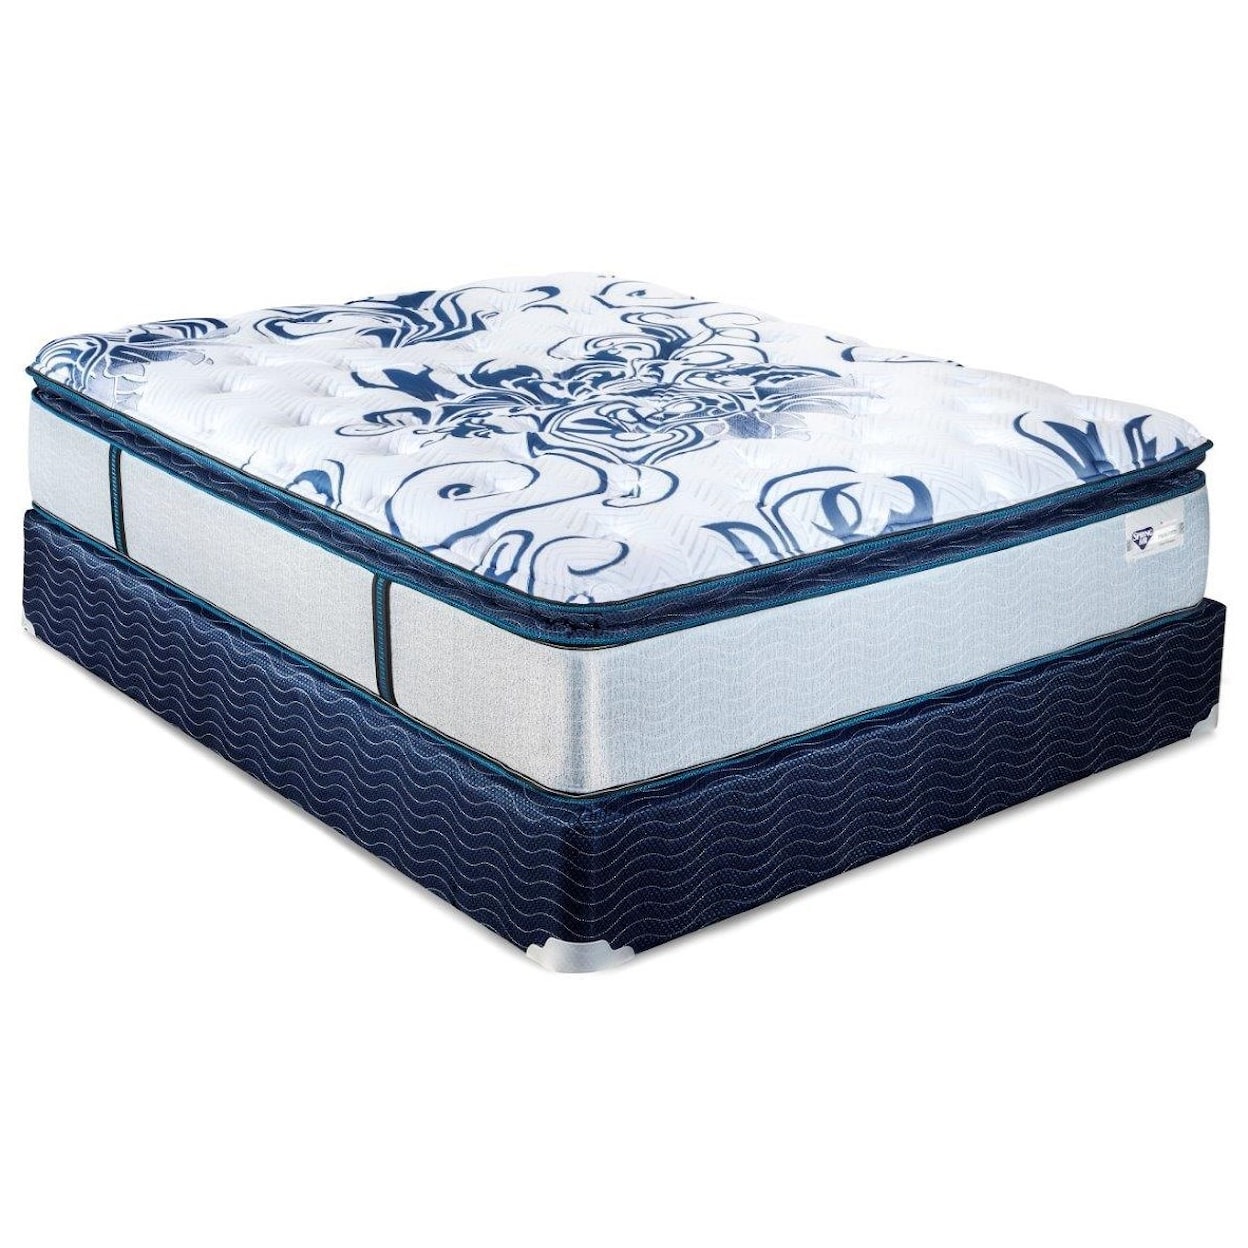 Spring Air Hyacinth ET Twin Pocketed Coil Mattress Set